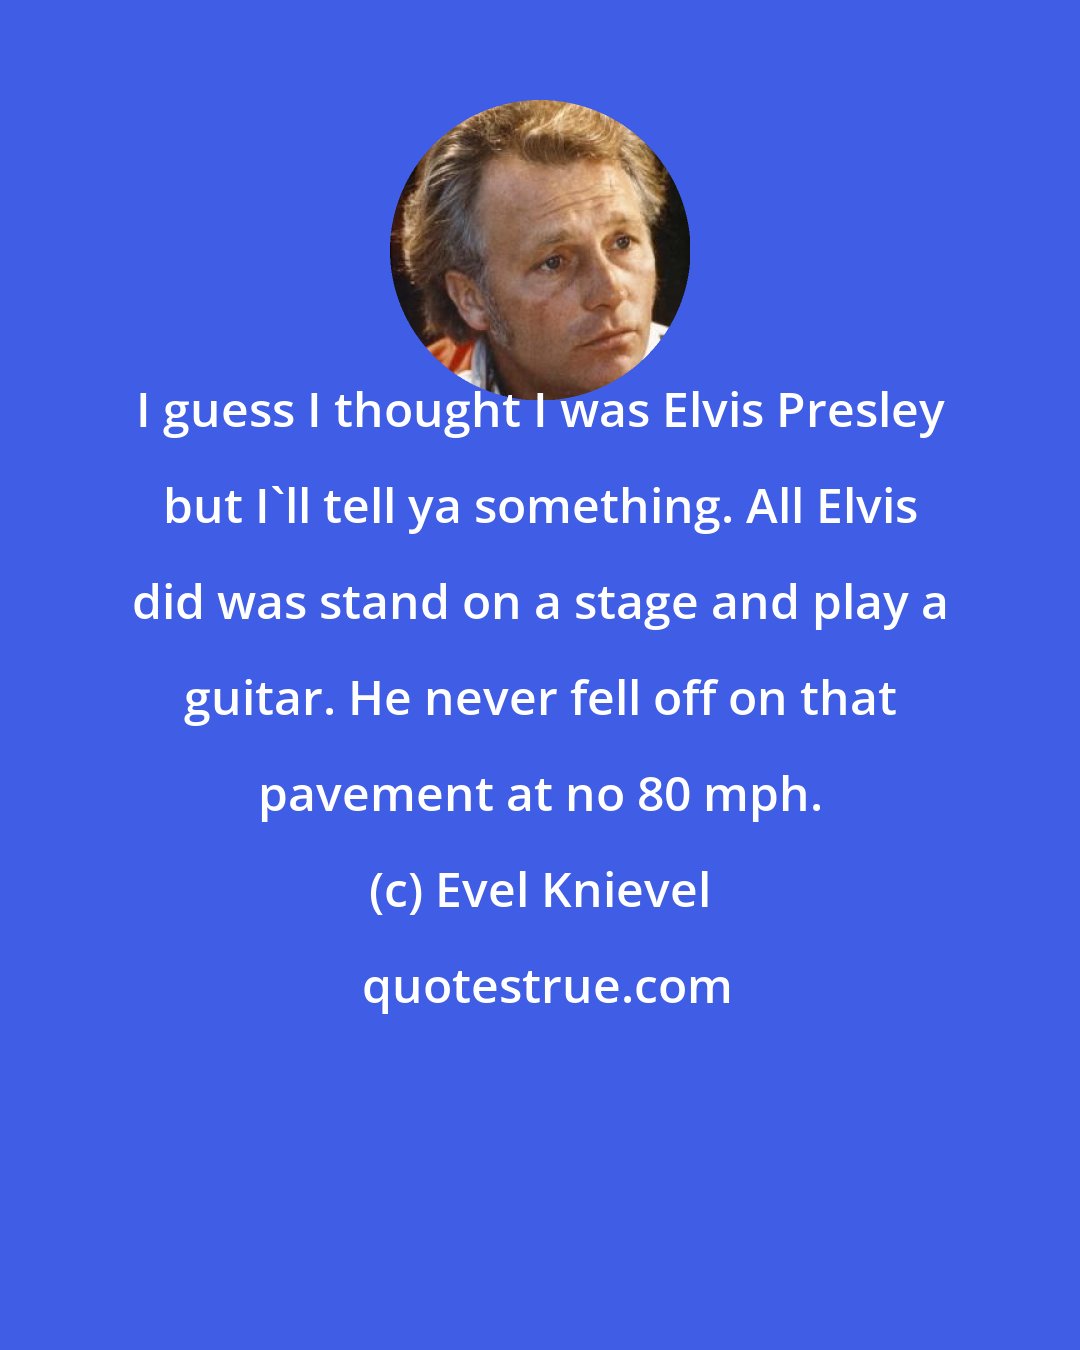 Evel Knievel: I guess I thought I was Elvis Presley but I'll tell ya something. All Elvis did was stand on a stage and play a guitar. He never fell off on that pavement at no 80 mph.